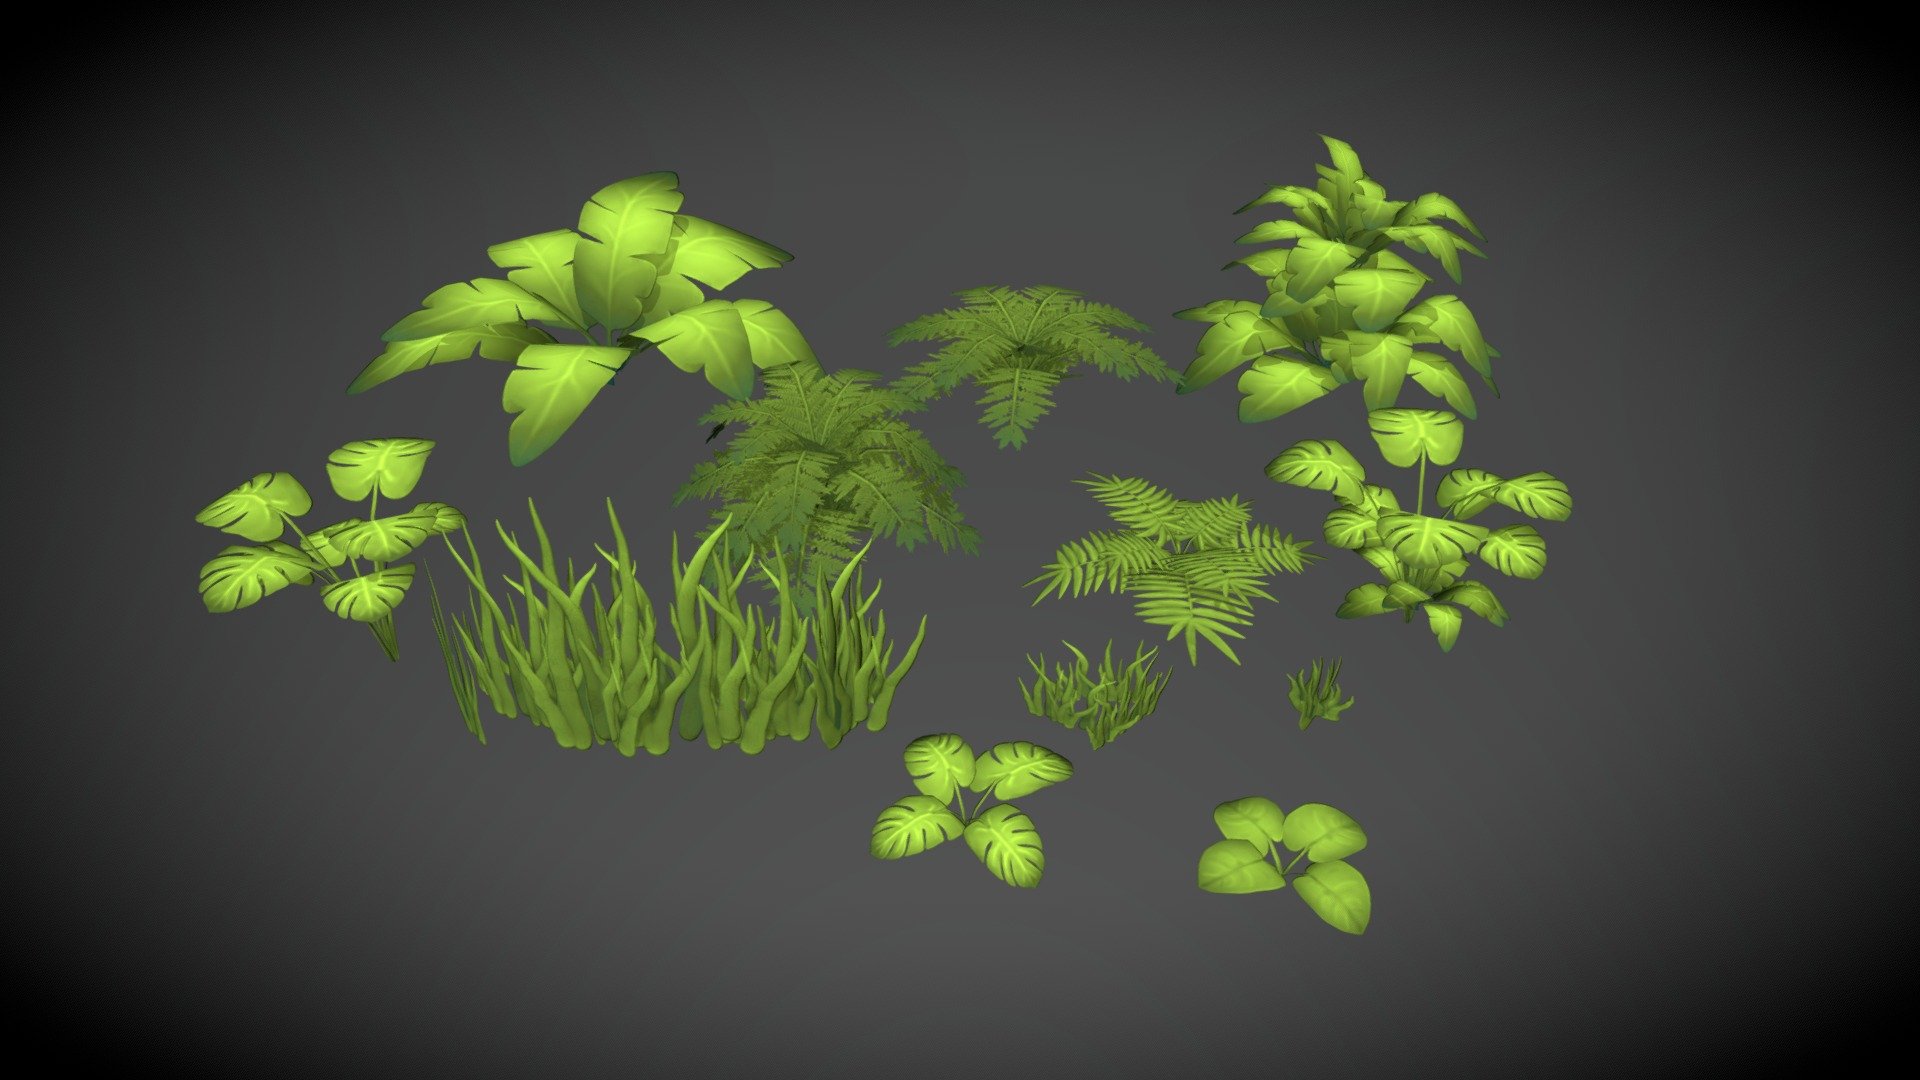 Some stylized plants i've made using maya Zbrush and Substance Designer, it's was my first aptemt to that kind of stuff, feel free to comment - Stylized Plants - 3D model by Eledanos 3d model